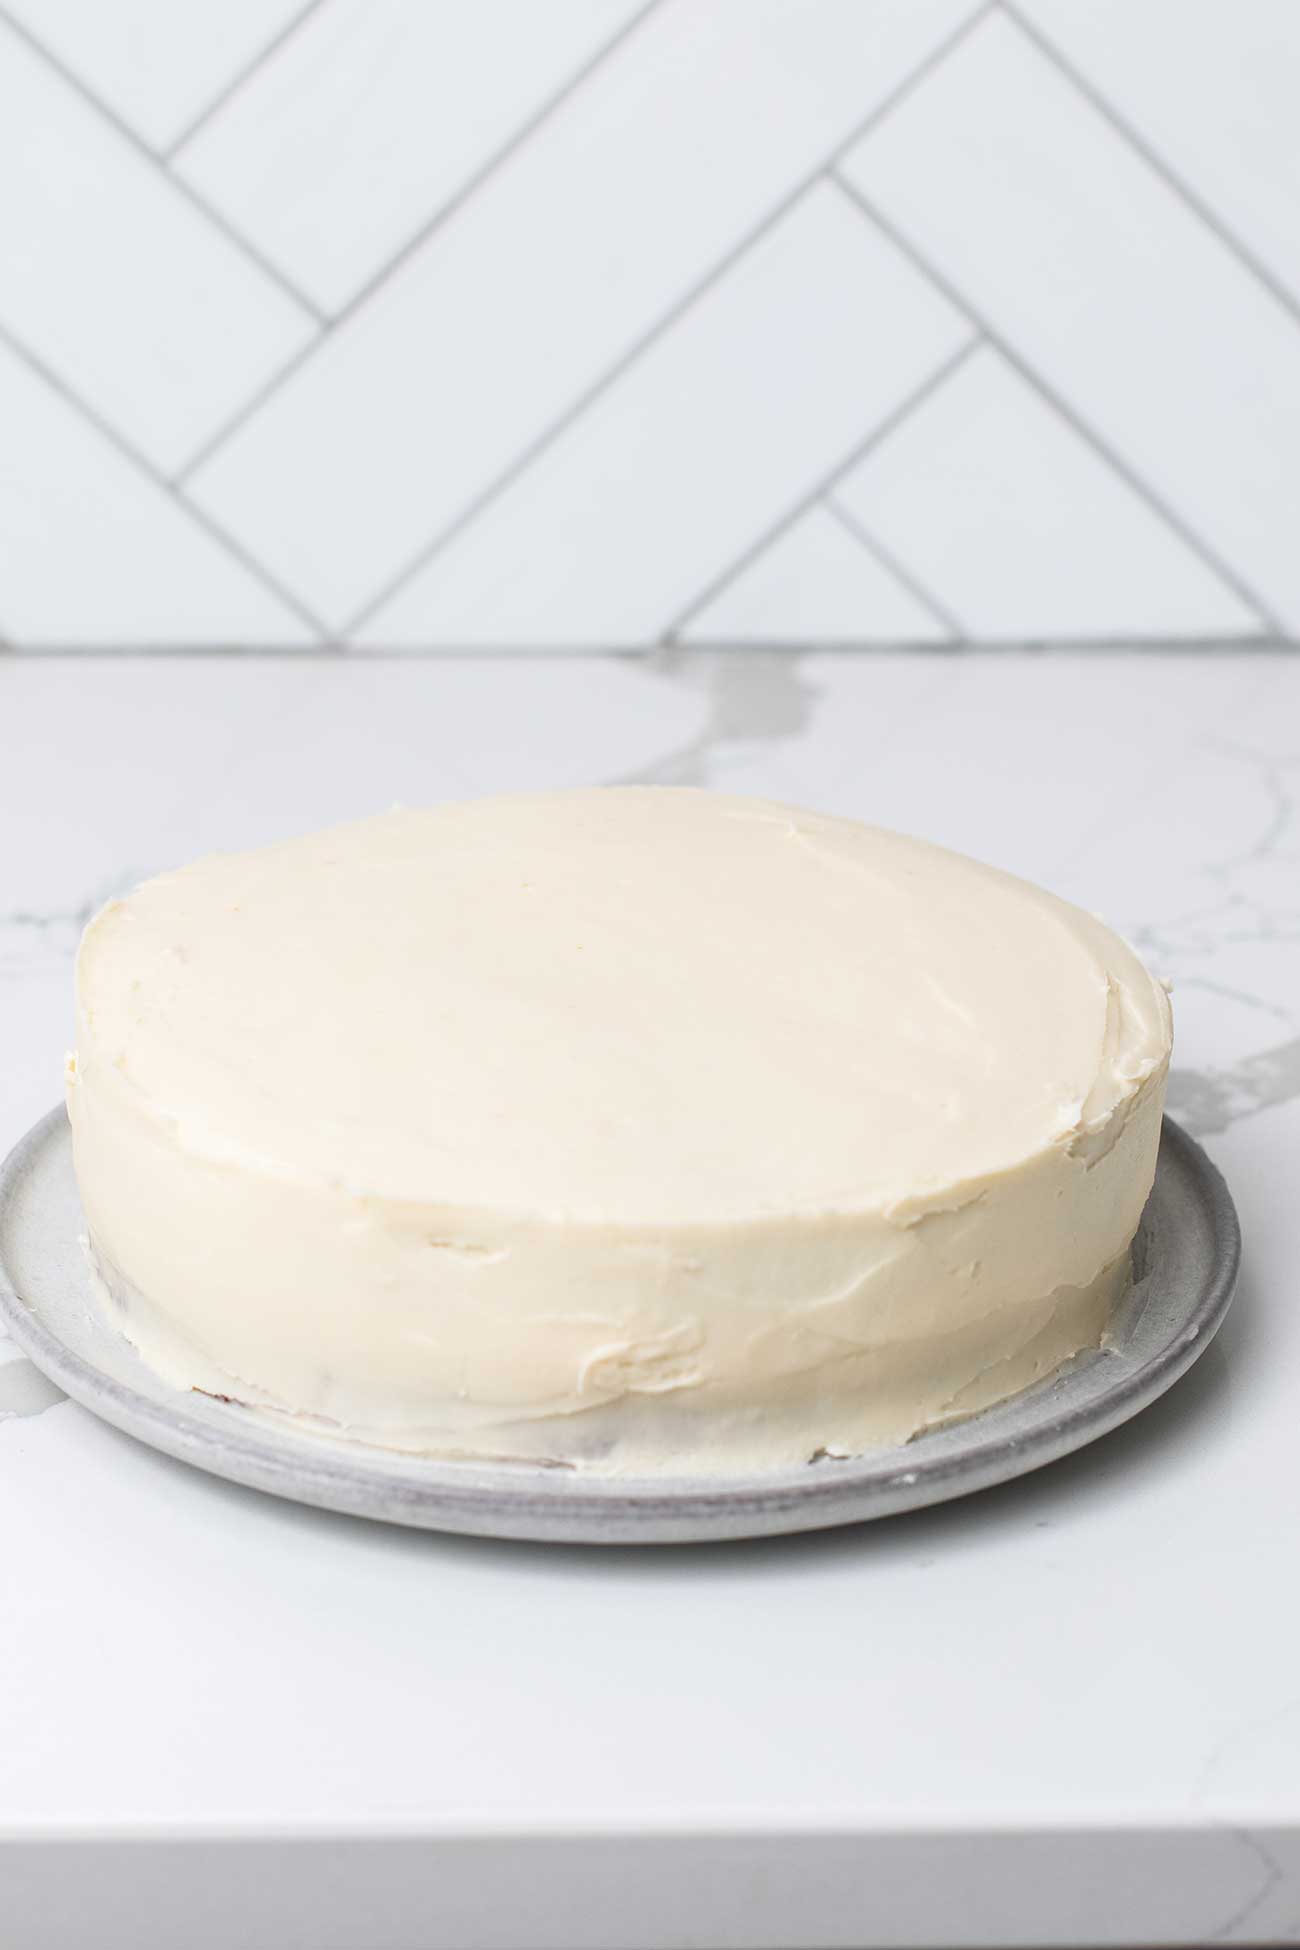 A thick even layer of cream cheese frosting on a carrot cake.